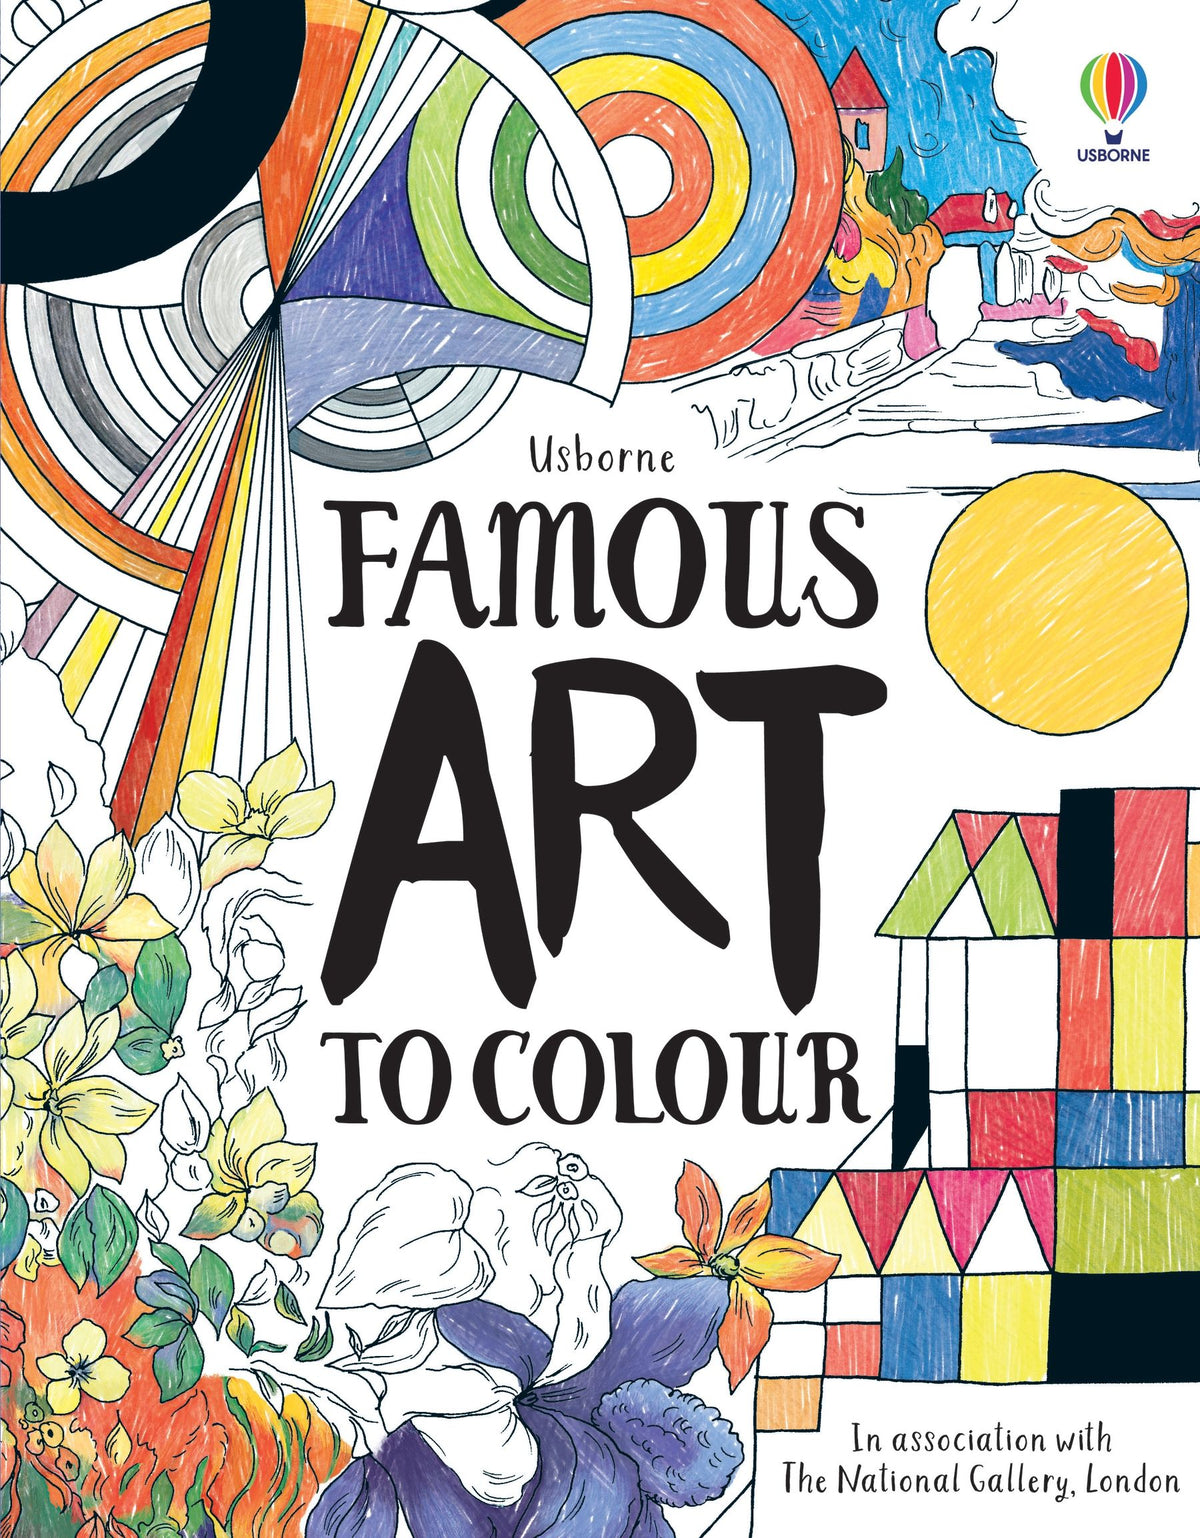 The front cover of a colouring book called &#39;Famous Art to Colour&#39; by Usborne in association with the National Gallery London. The cover shows a preview of the paintings inside that are available to colour and learn about.